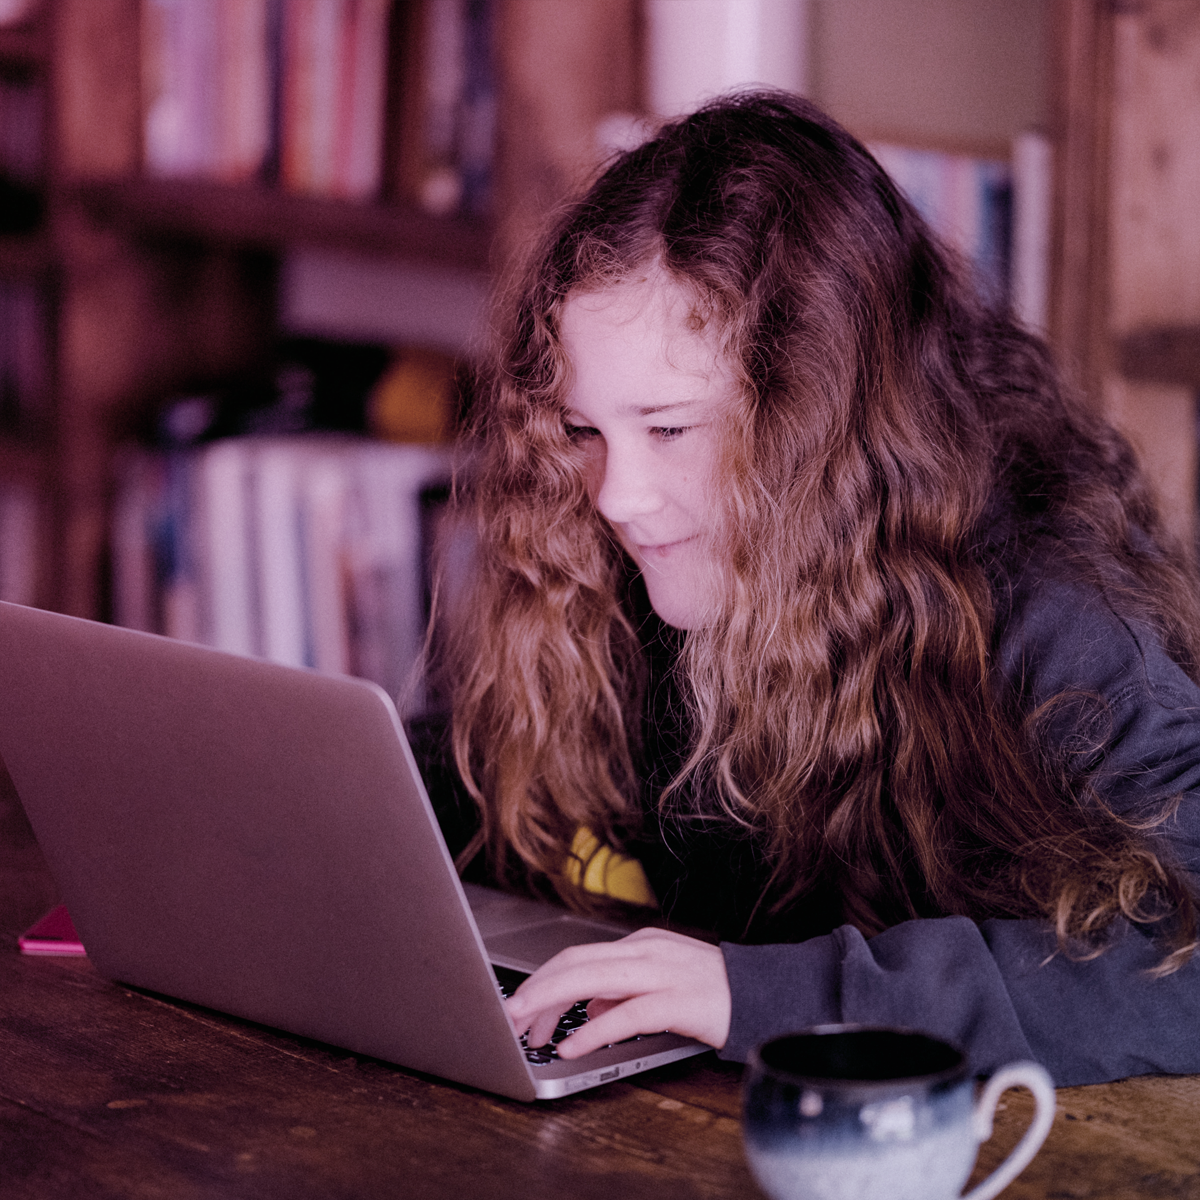 A girl sitting at a table with a laptop.